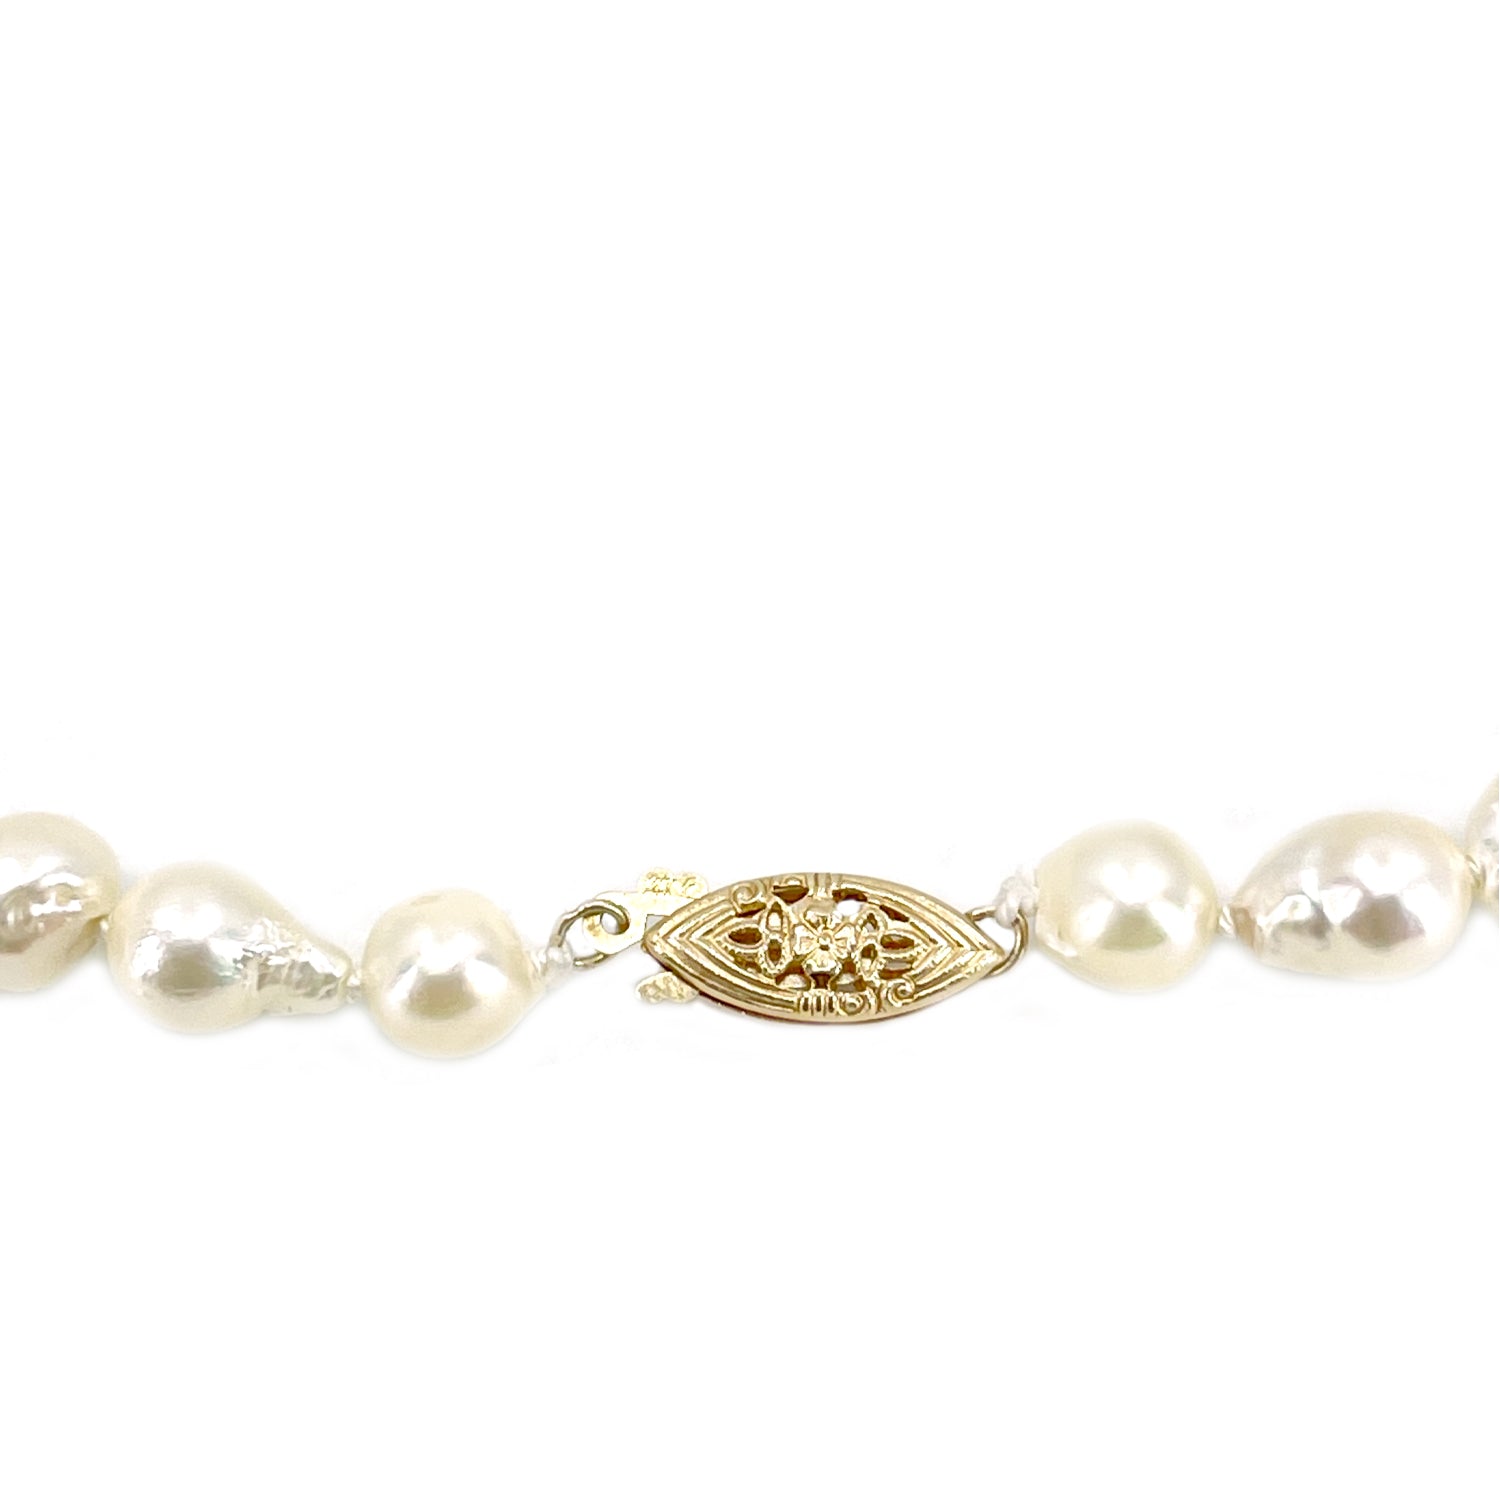 Modernist Baroque Japanese Cultured Akoya Pearl Vintage Necklace - 14K Yellow Gold 19.50 Inch